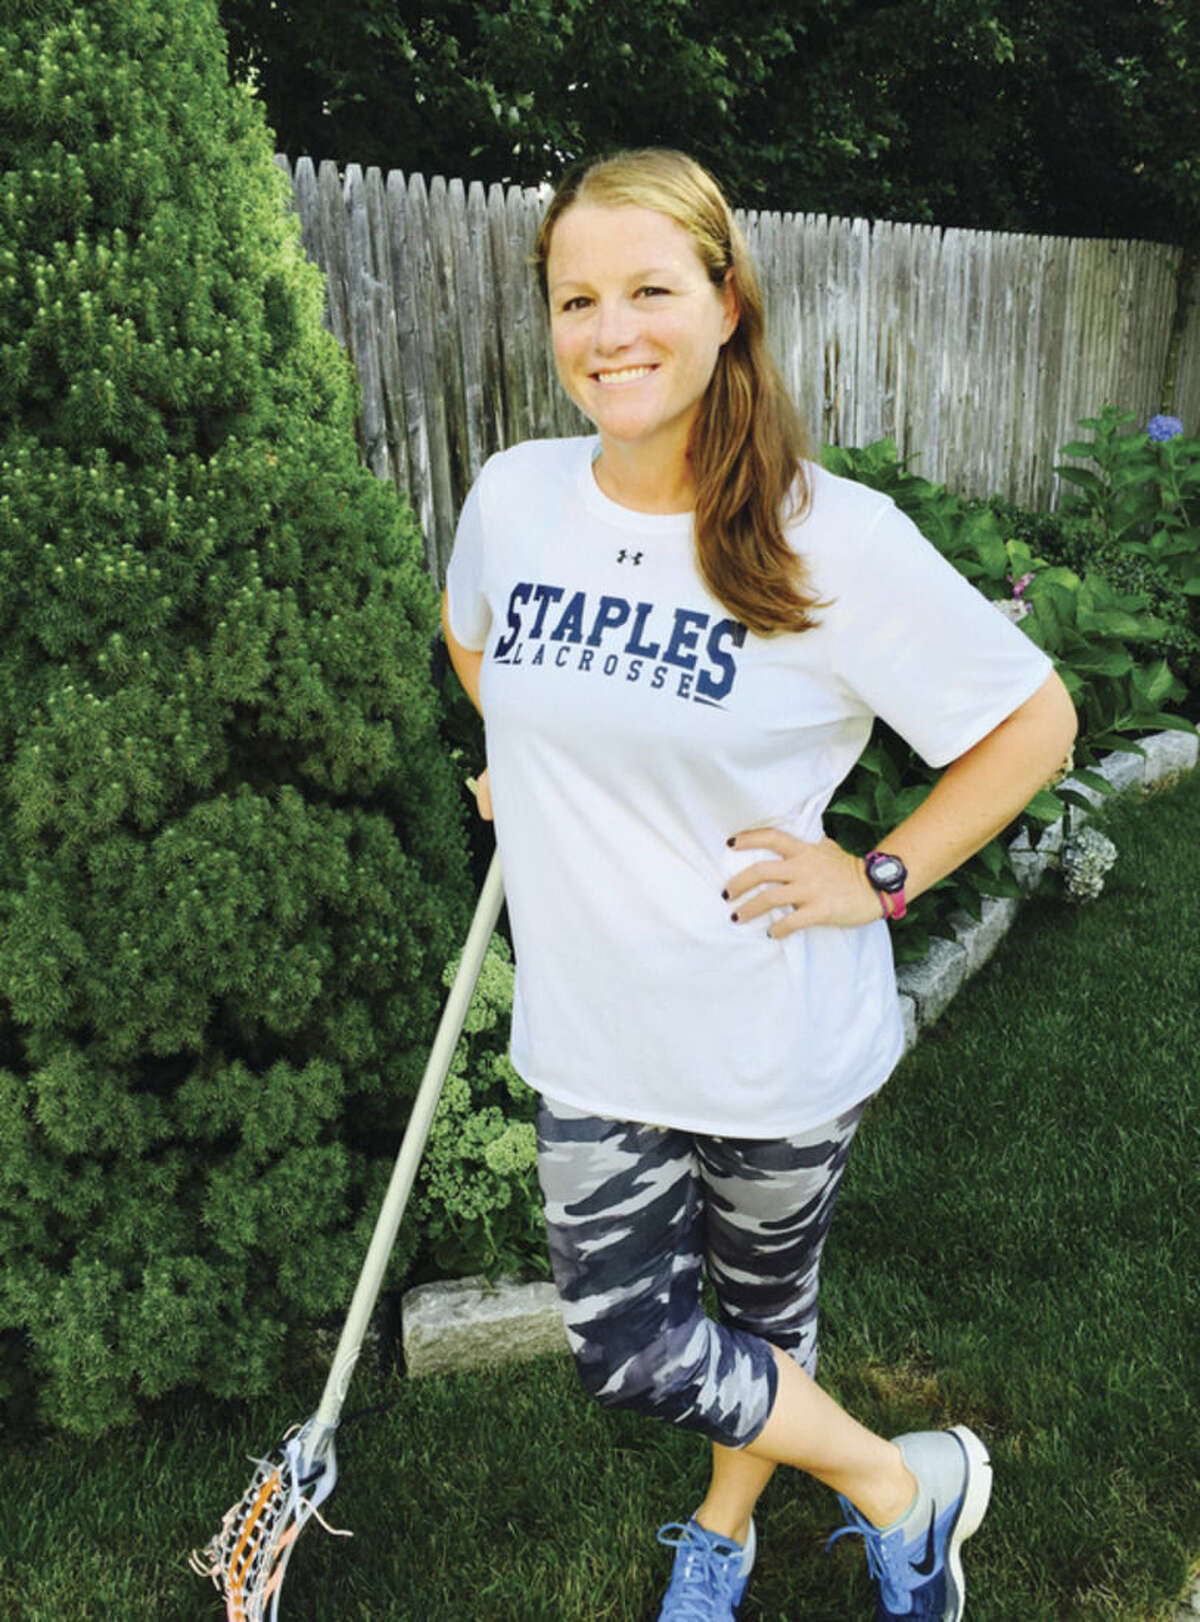 Staples girls lacrosse coach Steph Calabrese.